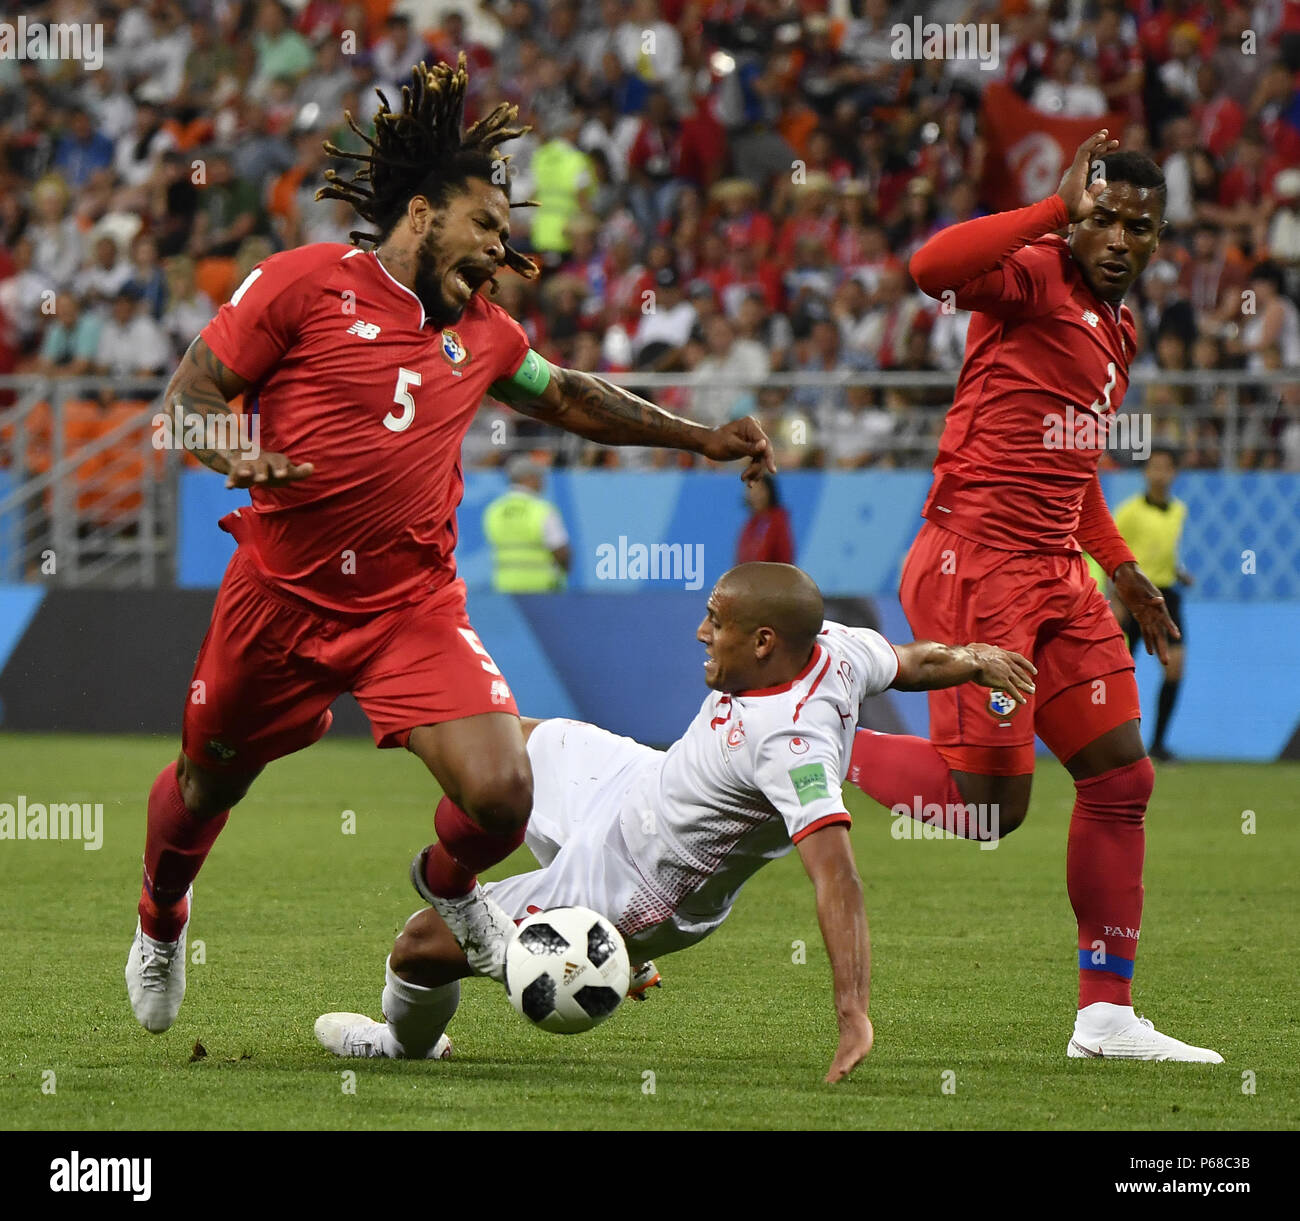 Saransk, Russia. 28th June, 2018. Roman Torres (L) of Panama breaks through with the ball during the 2018 FIFA World Cup Group G match between Panama and Tunisia in Saransk, Russia, June 28, 2018. Credit: He Canling/Xinhua/Alamy Live News Stock Photo